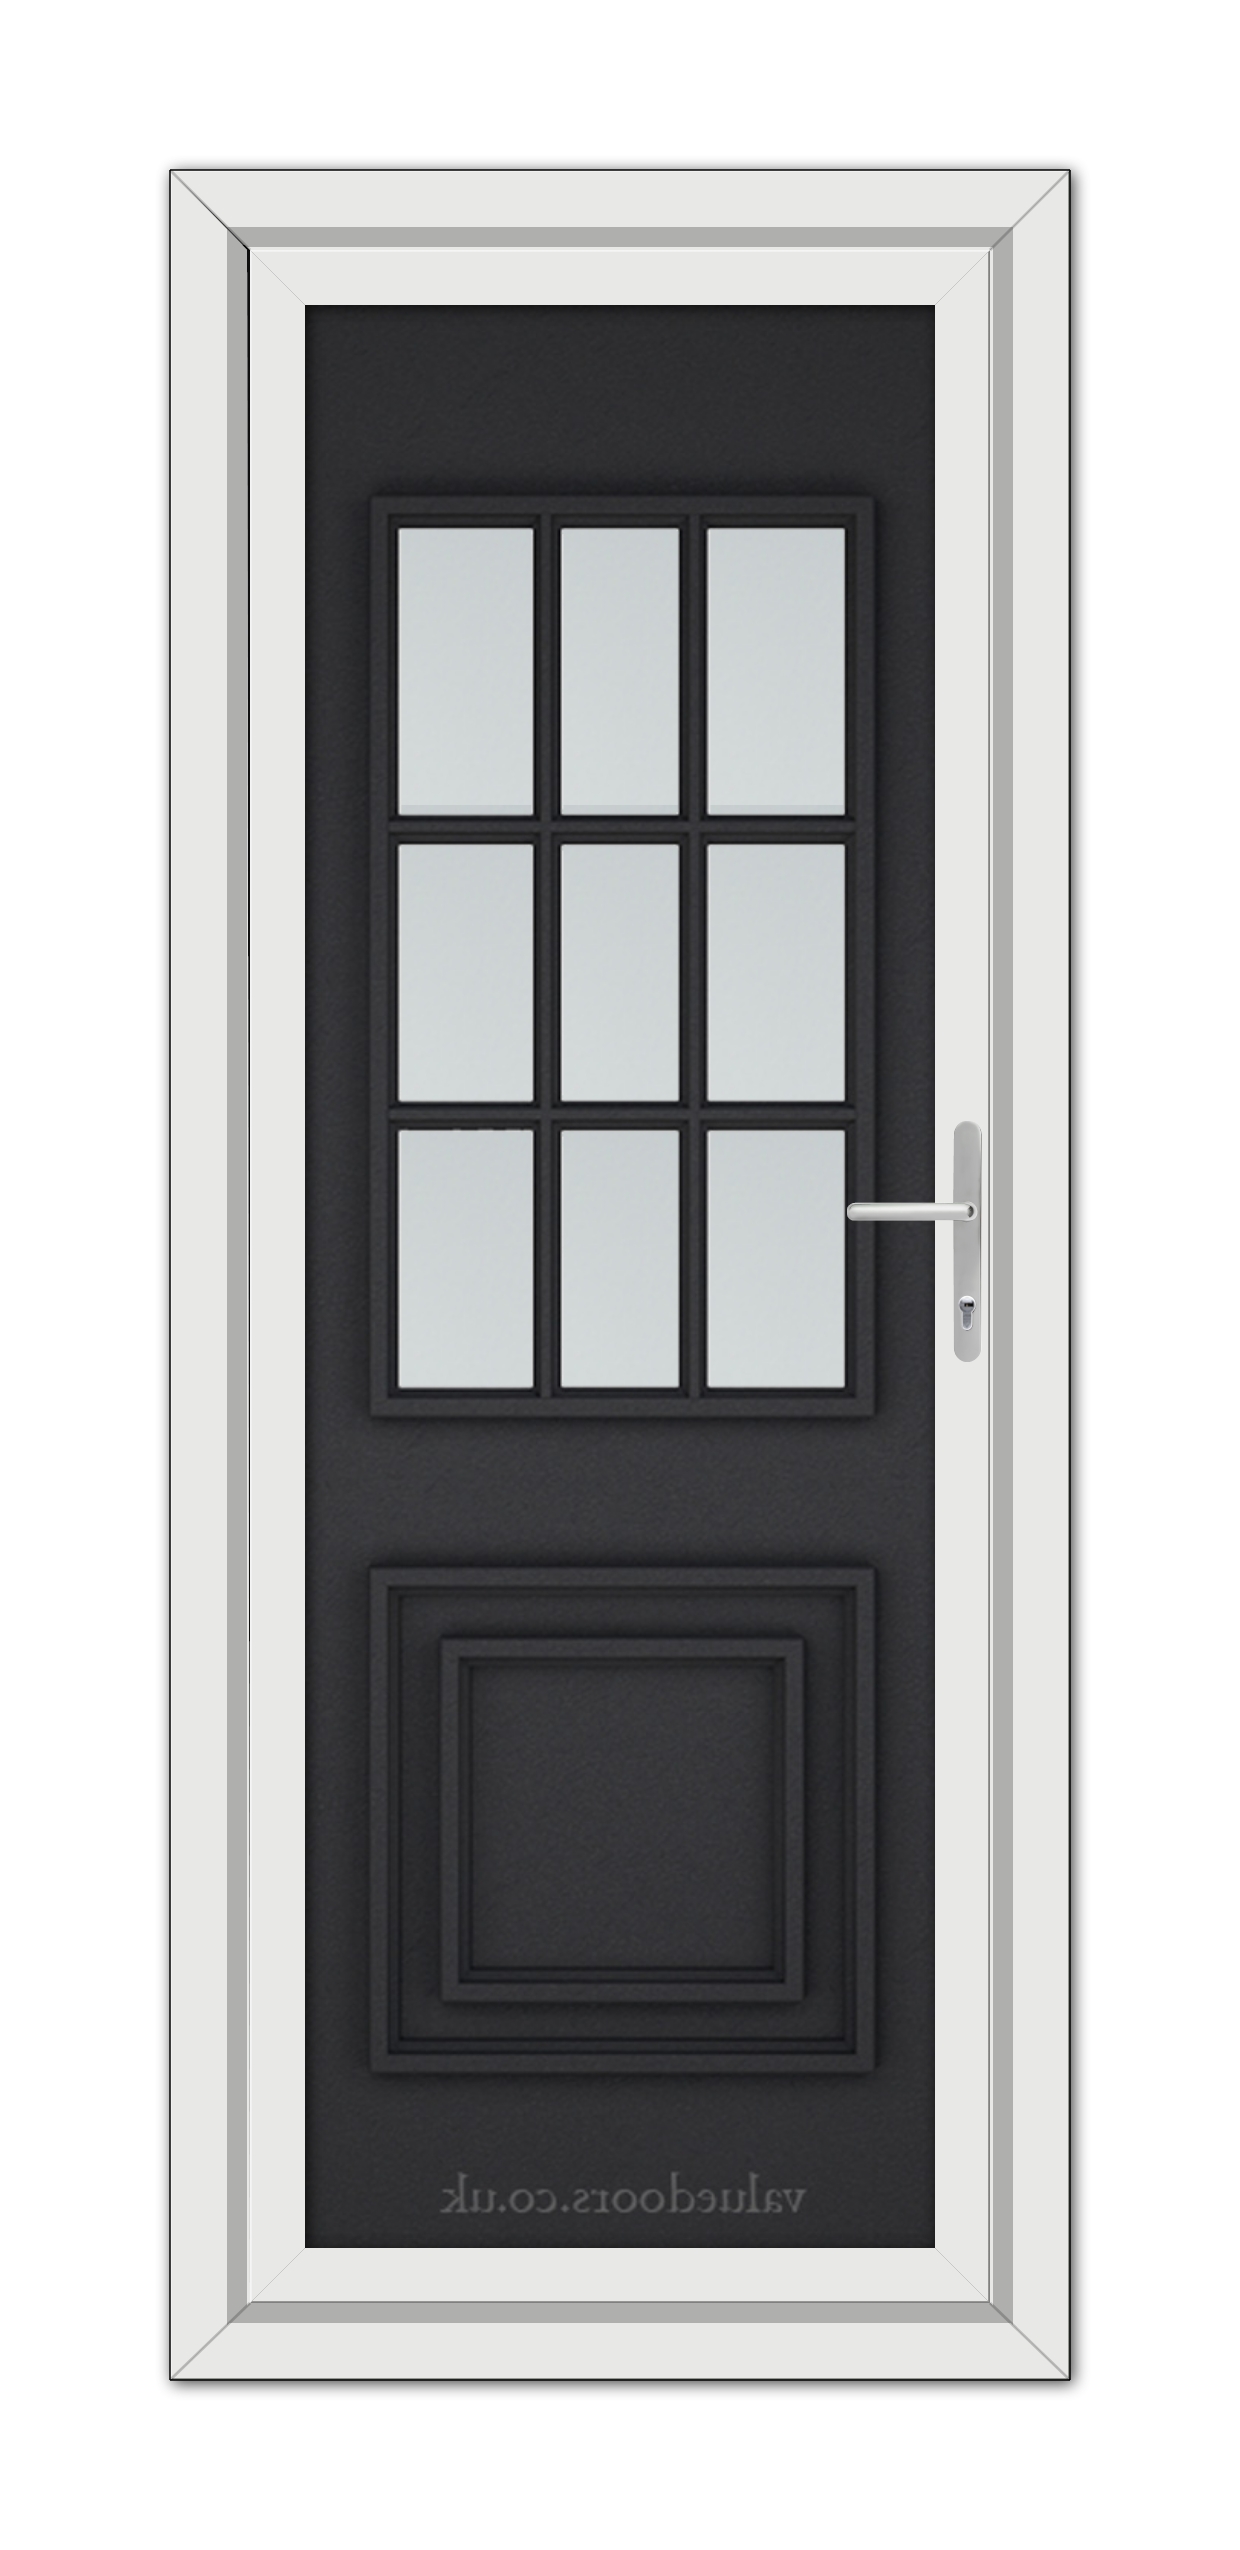 A modern Black Brown Cambridge One uPVC Door with nine glass panels, a metallic handle on the right, and a white frame, isolated on a white background.